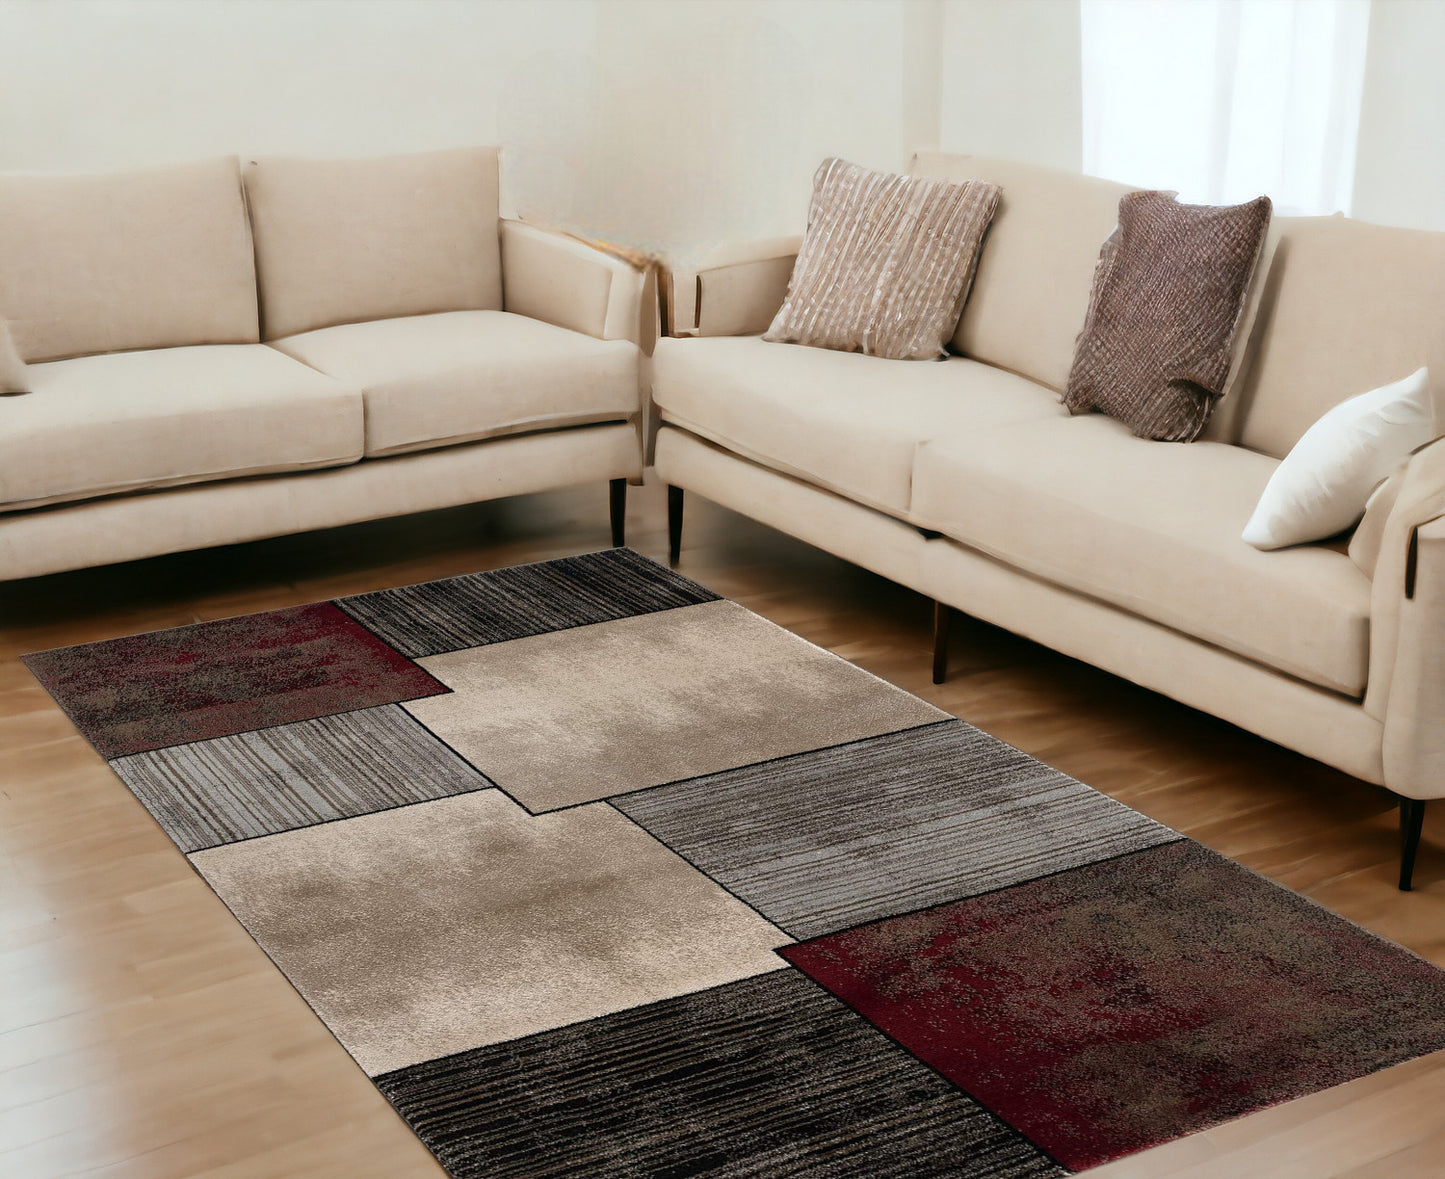 6' X 9' Brown Abstract Dhurrie Area Rug